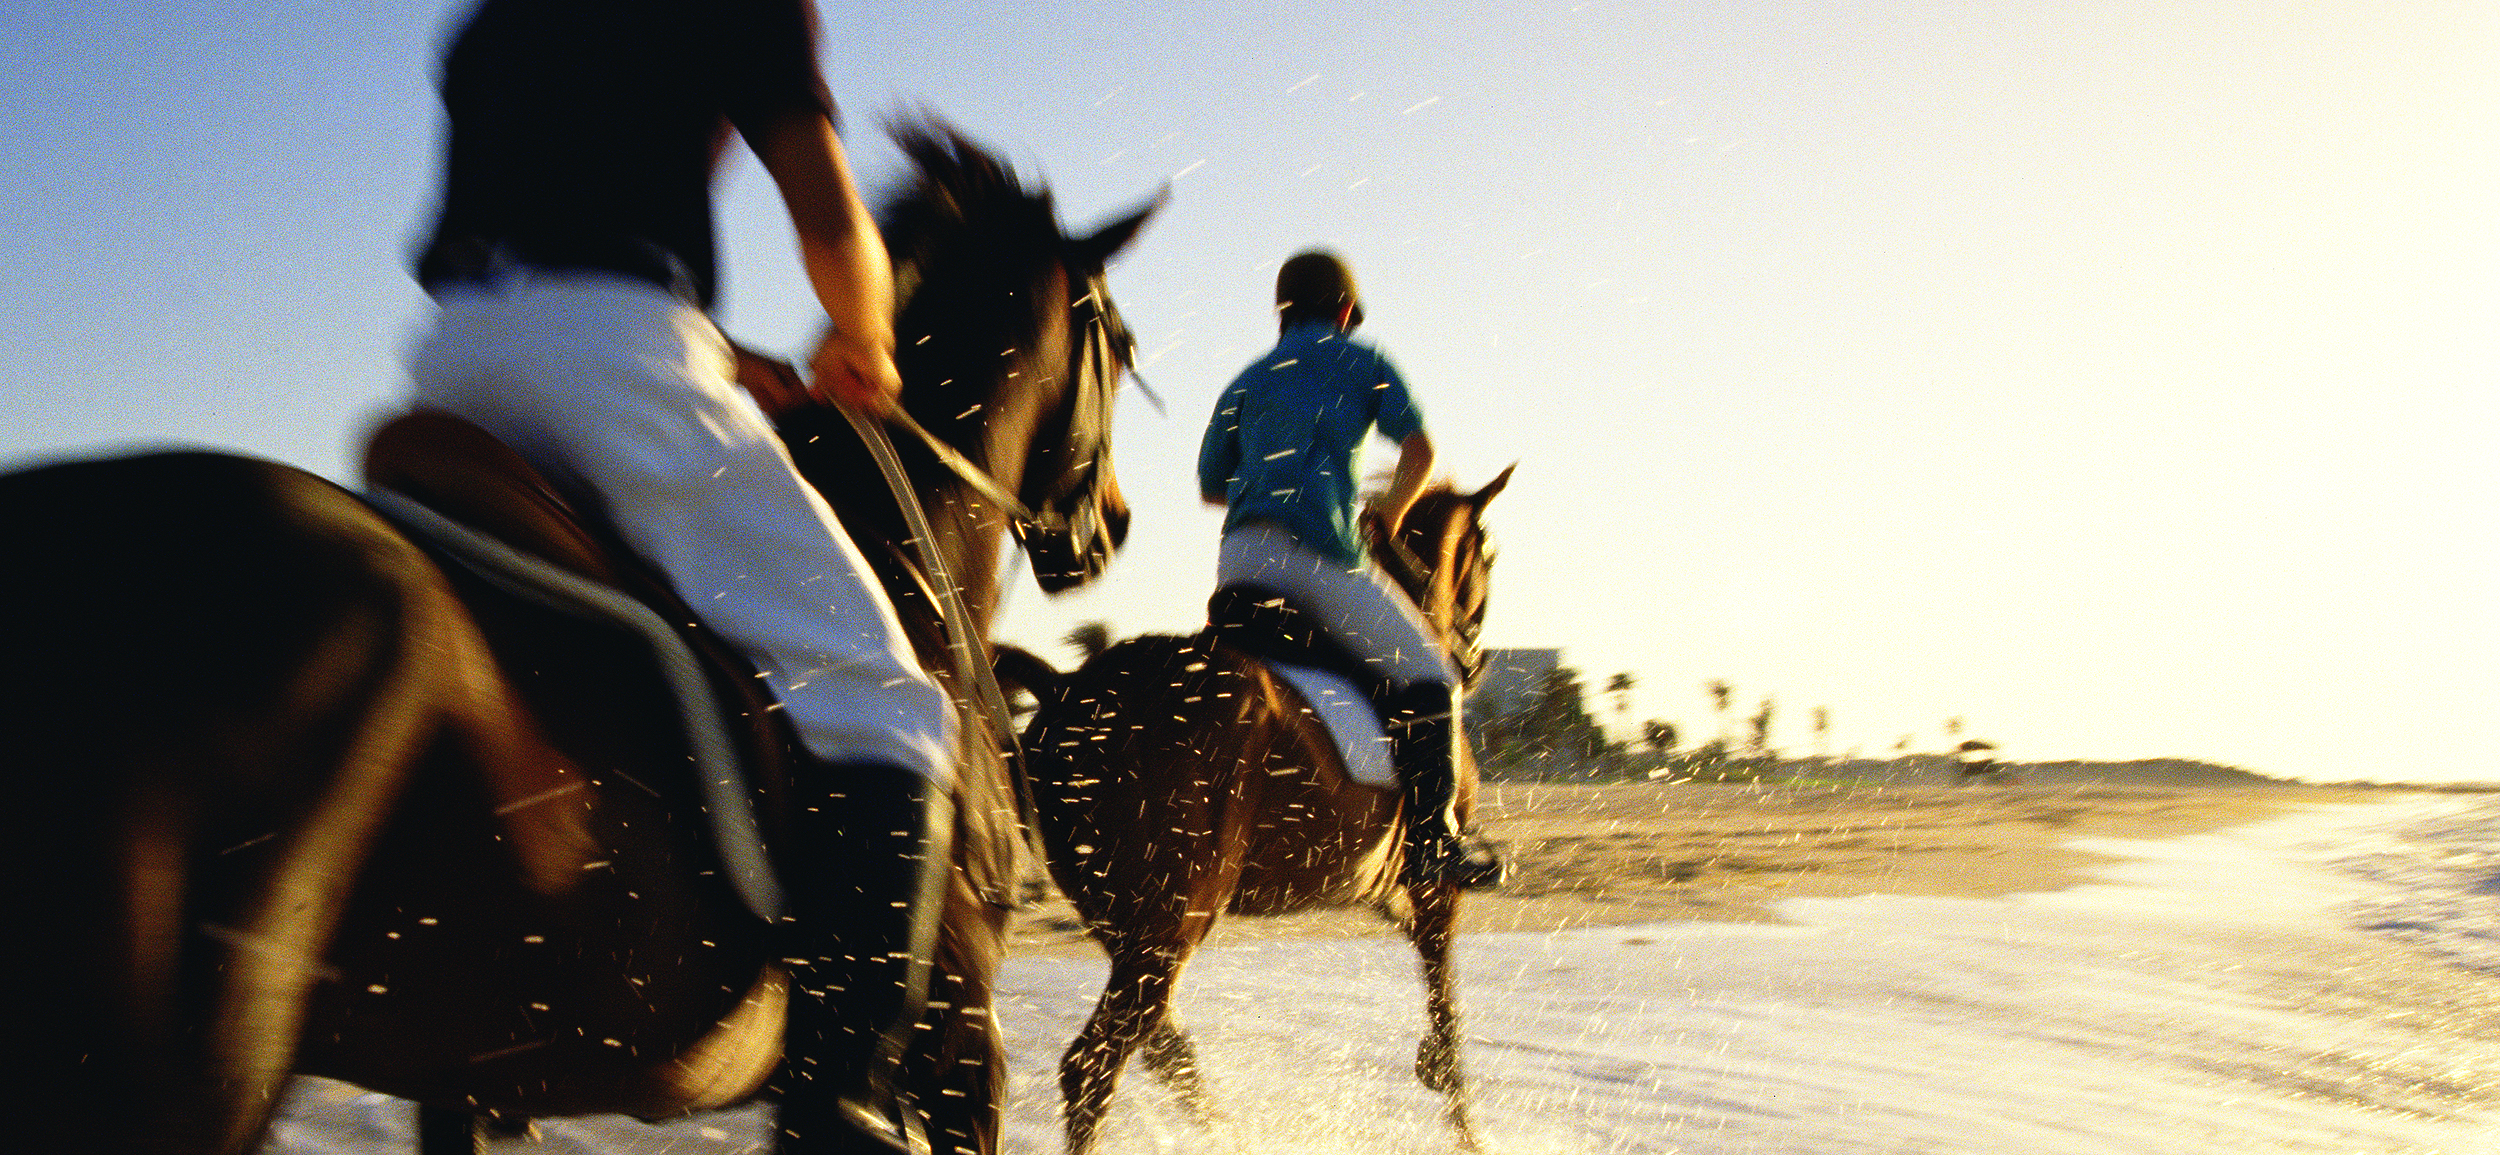 Horse riding in Dubai.  Travel photography by Mike Caldwell